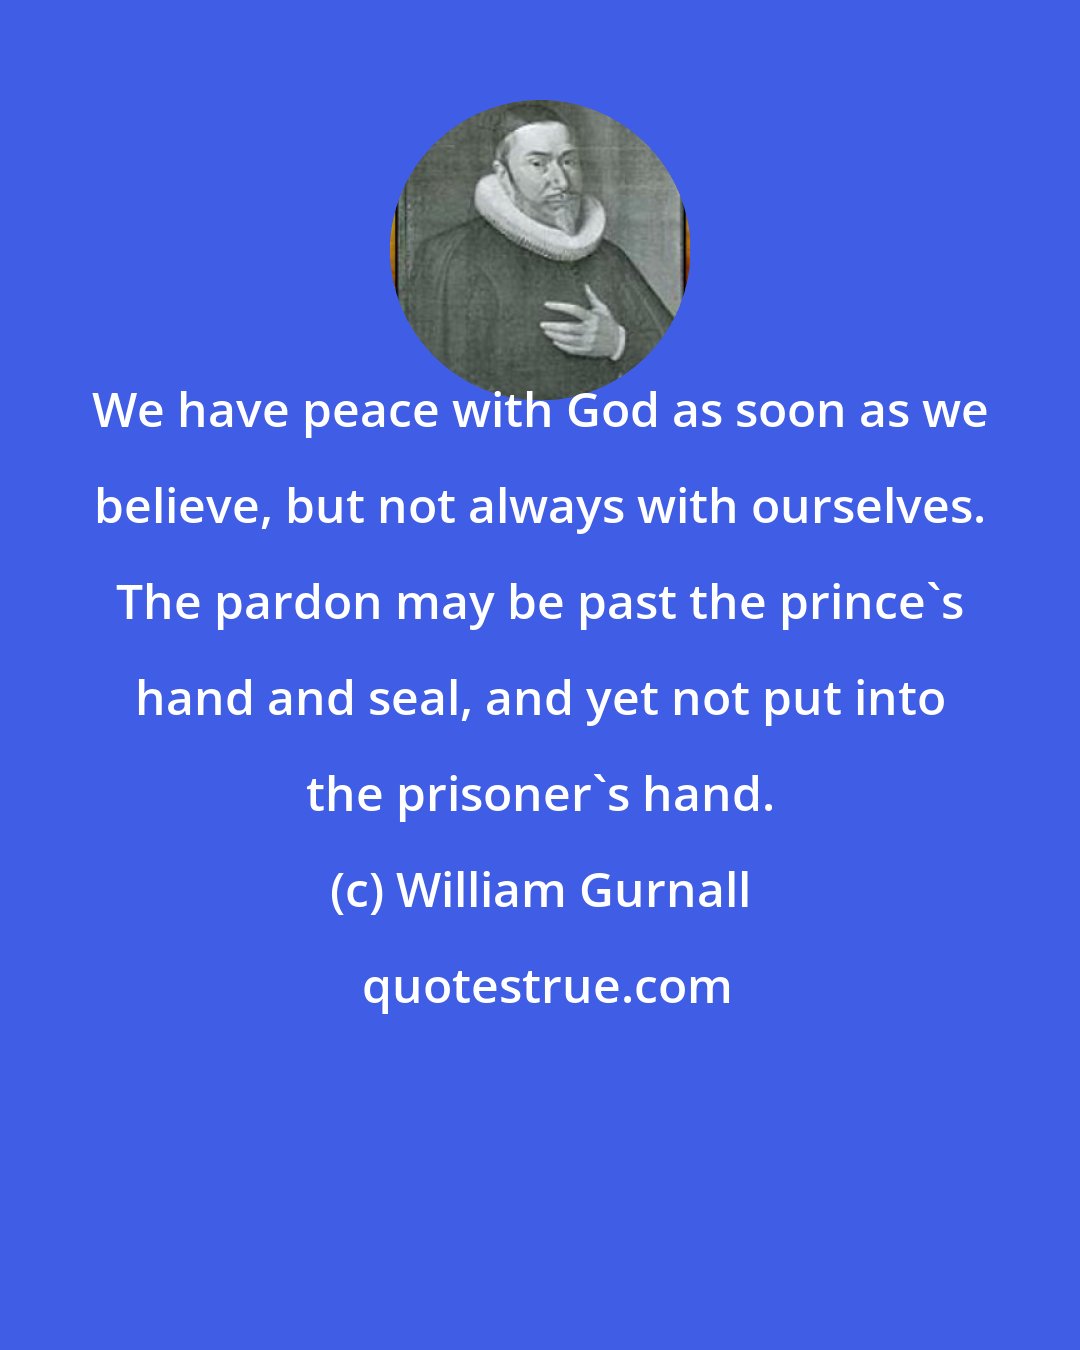 William Gurnall: We have peace with God as soon as we believe, but not always with ourselves. The pardon may be past the prince's hand and seal, and yet not put into the prisoner's hand.